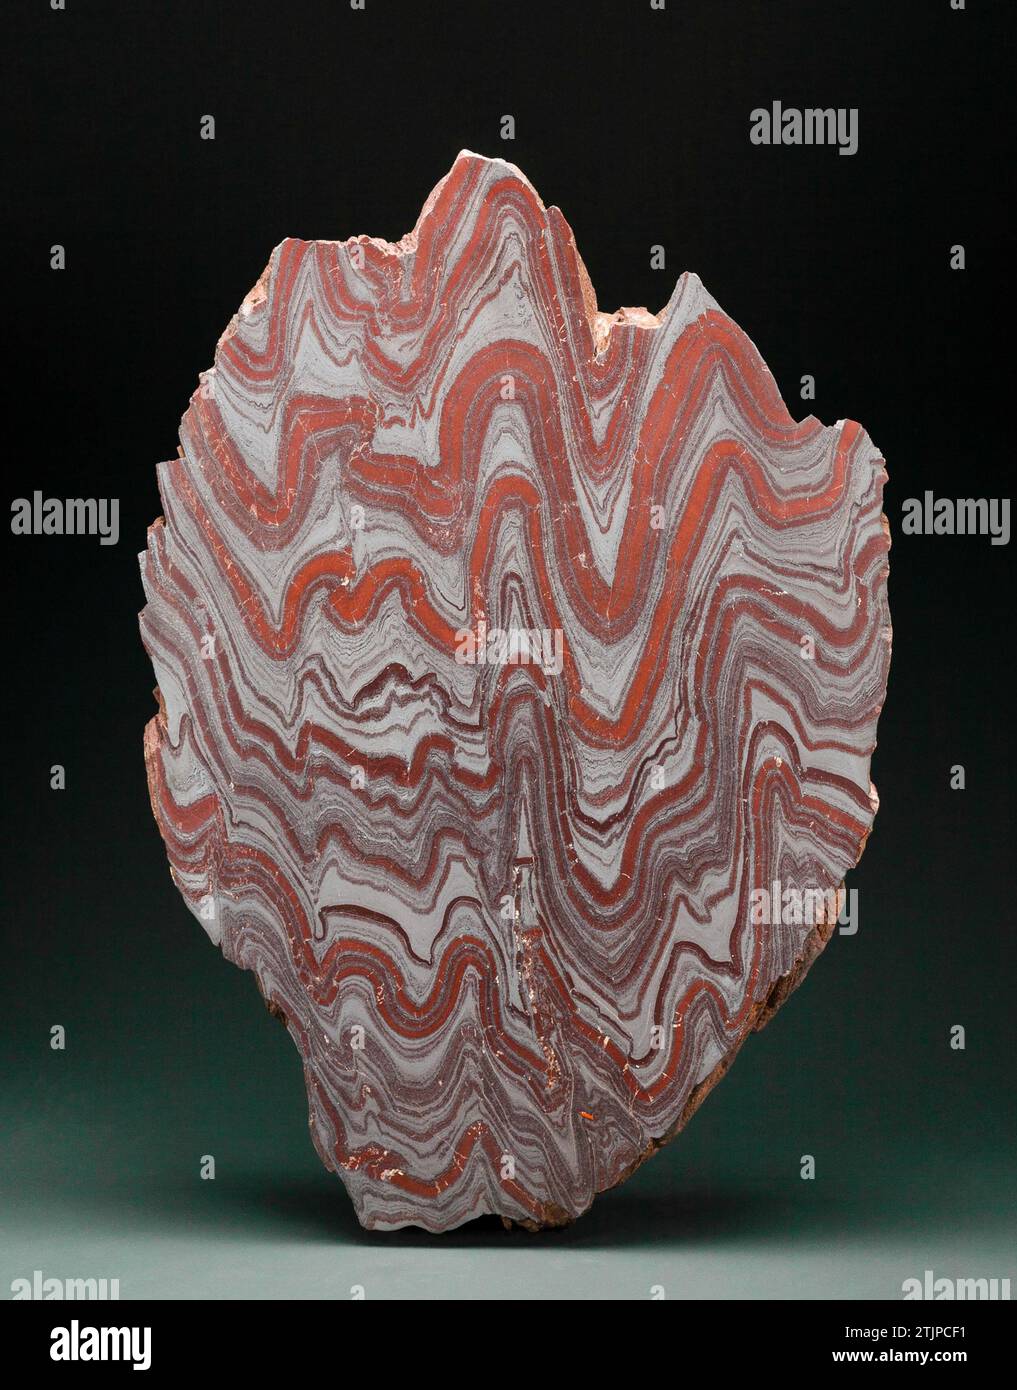 Cut and polished banded iron formation. On land, red beds (iron oxide deposits) form only if the atmosphere contains free oxygen. This rock, about 2.2 billion years old, tells us that the atmosphere had at least some oxygen. Many scientists think atmospheric oxygen levels then were about 1 percent today's levels.  An optimised version of an image from the Mineral Sciences collections at the Smithsonian Institution National Museum of Natural History. USA Stock Photo